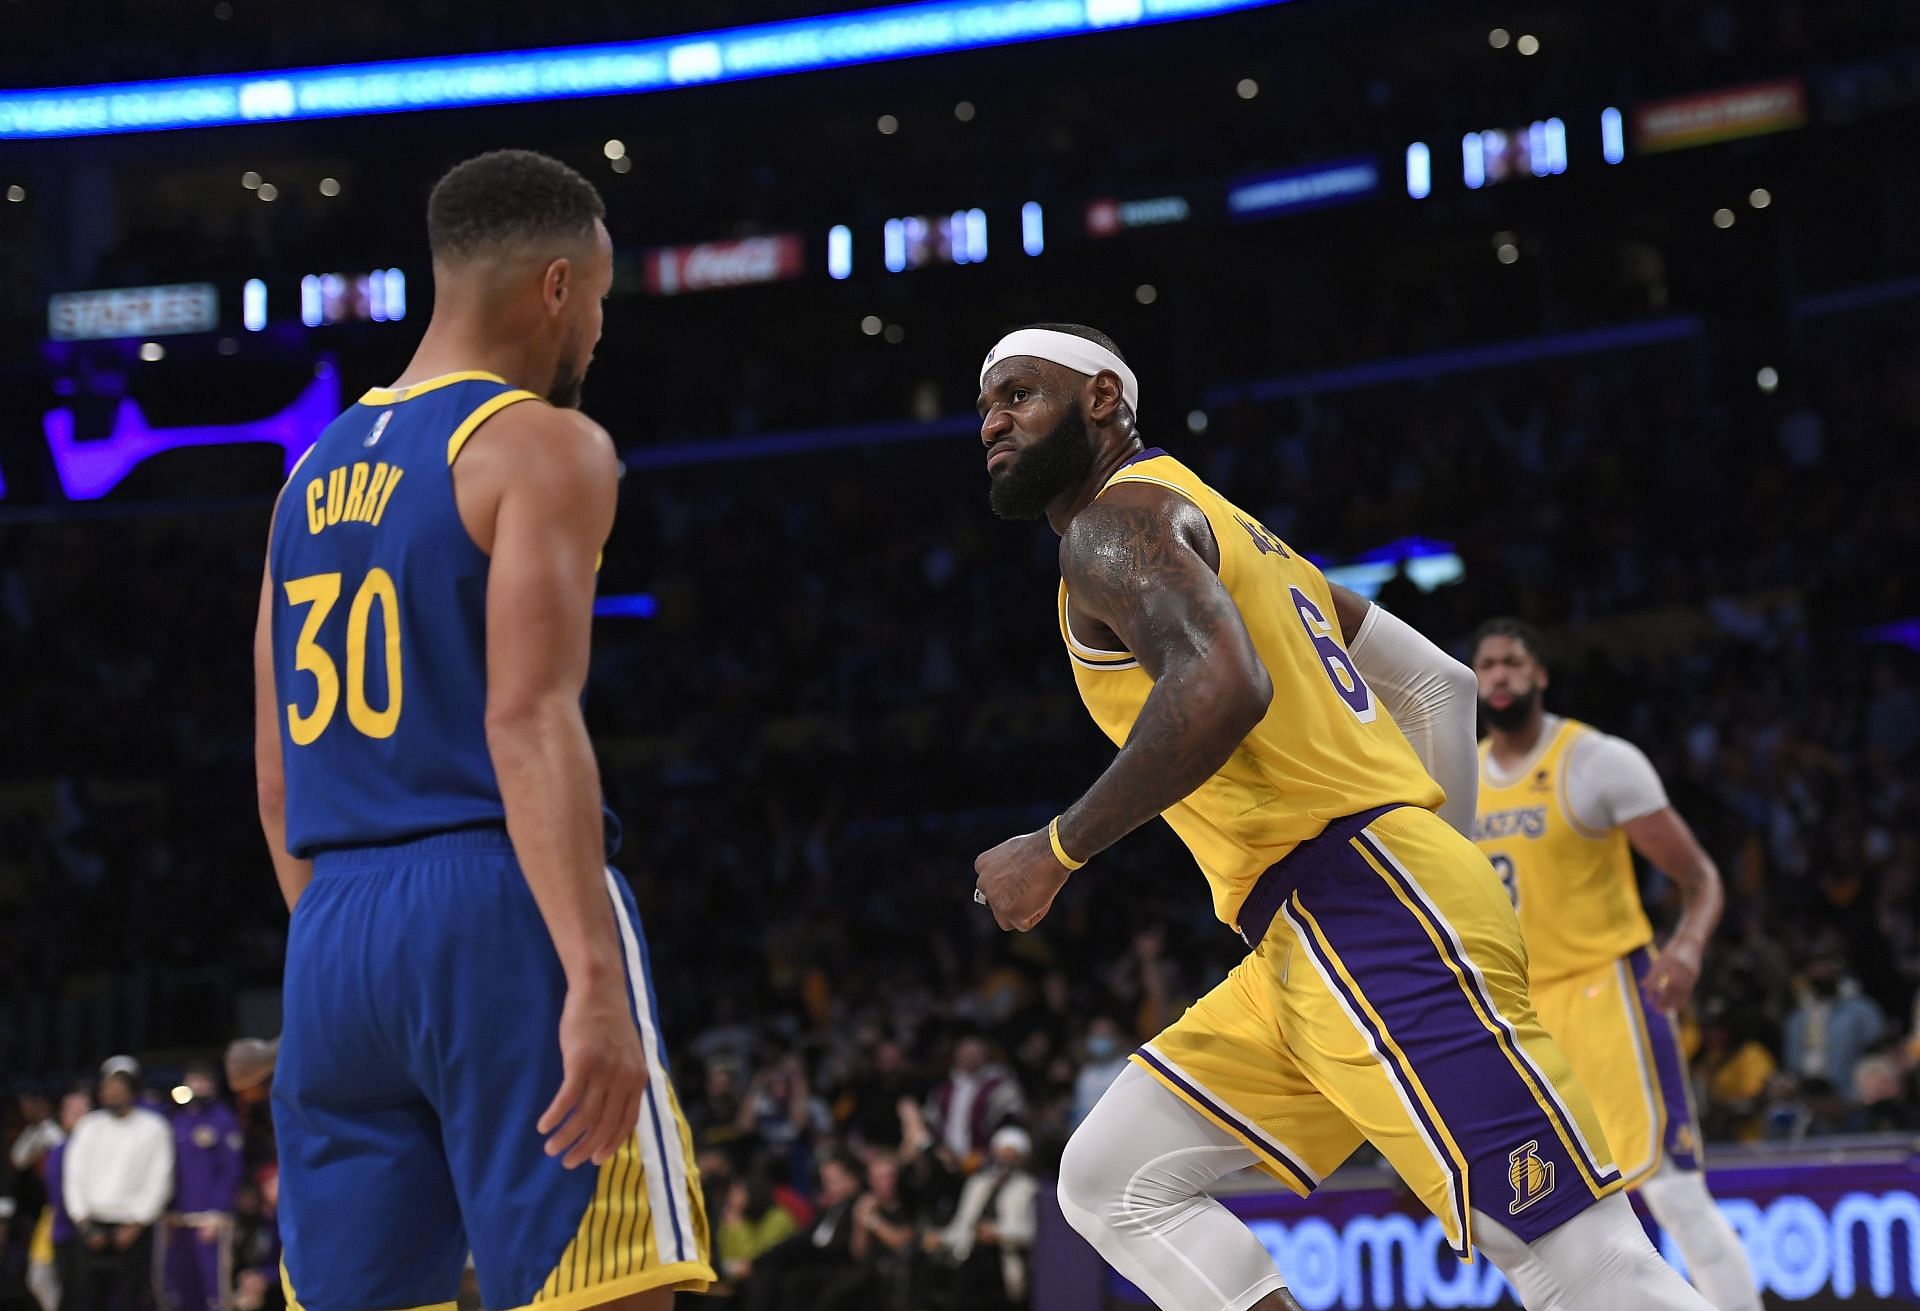 LeBron James of the LA Lakers against Steph Curry of the Golden State Warriors